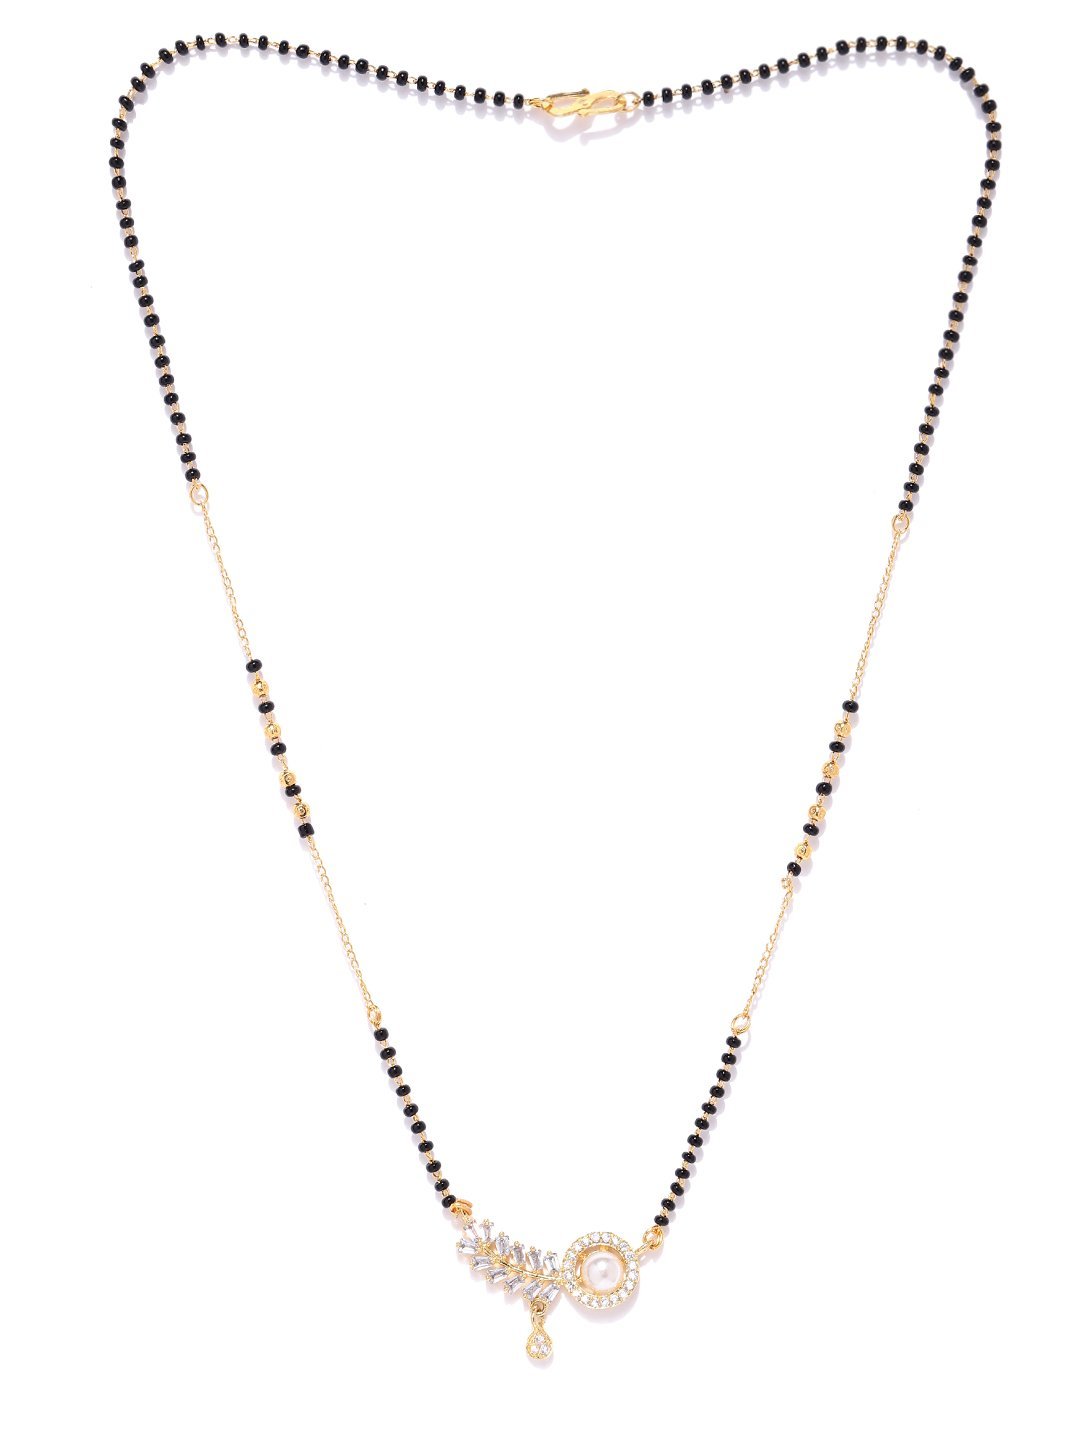 Women's Gold-Plated AD Studded Leaf Designed Pendant Black Beaded Chain Mangalsutra - Priyaasi